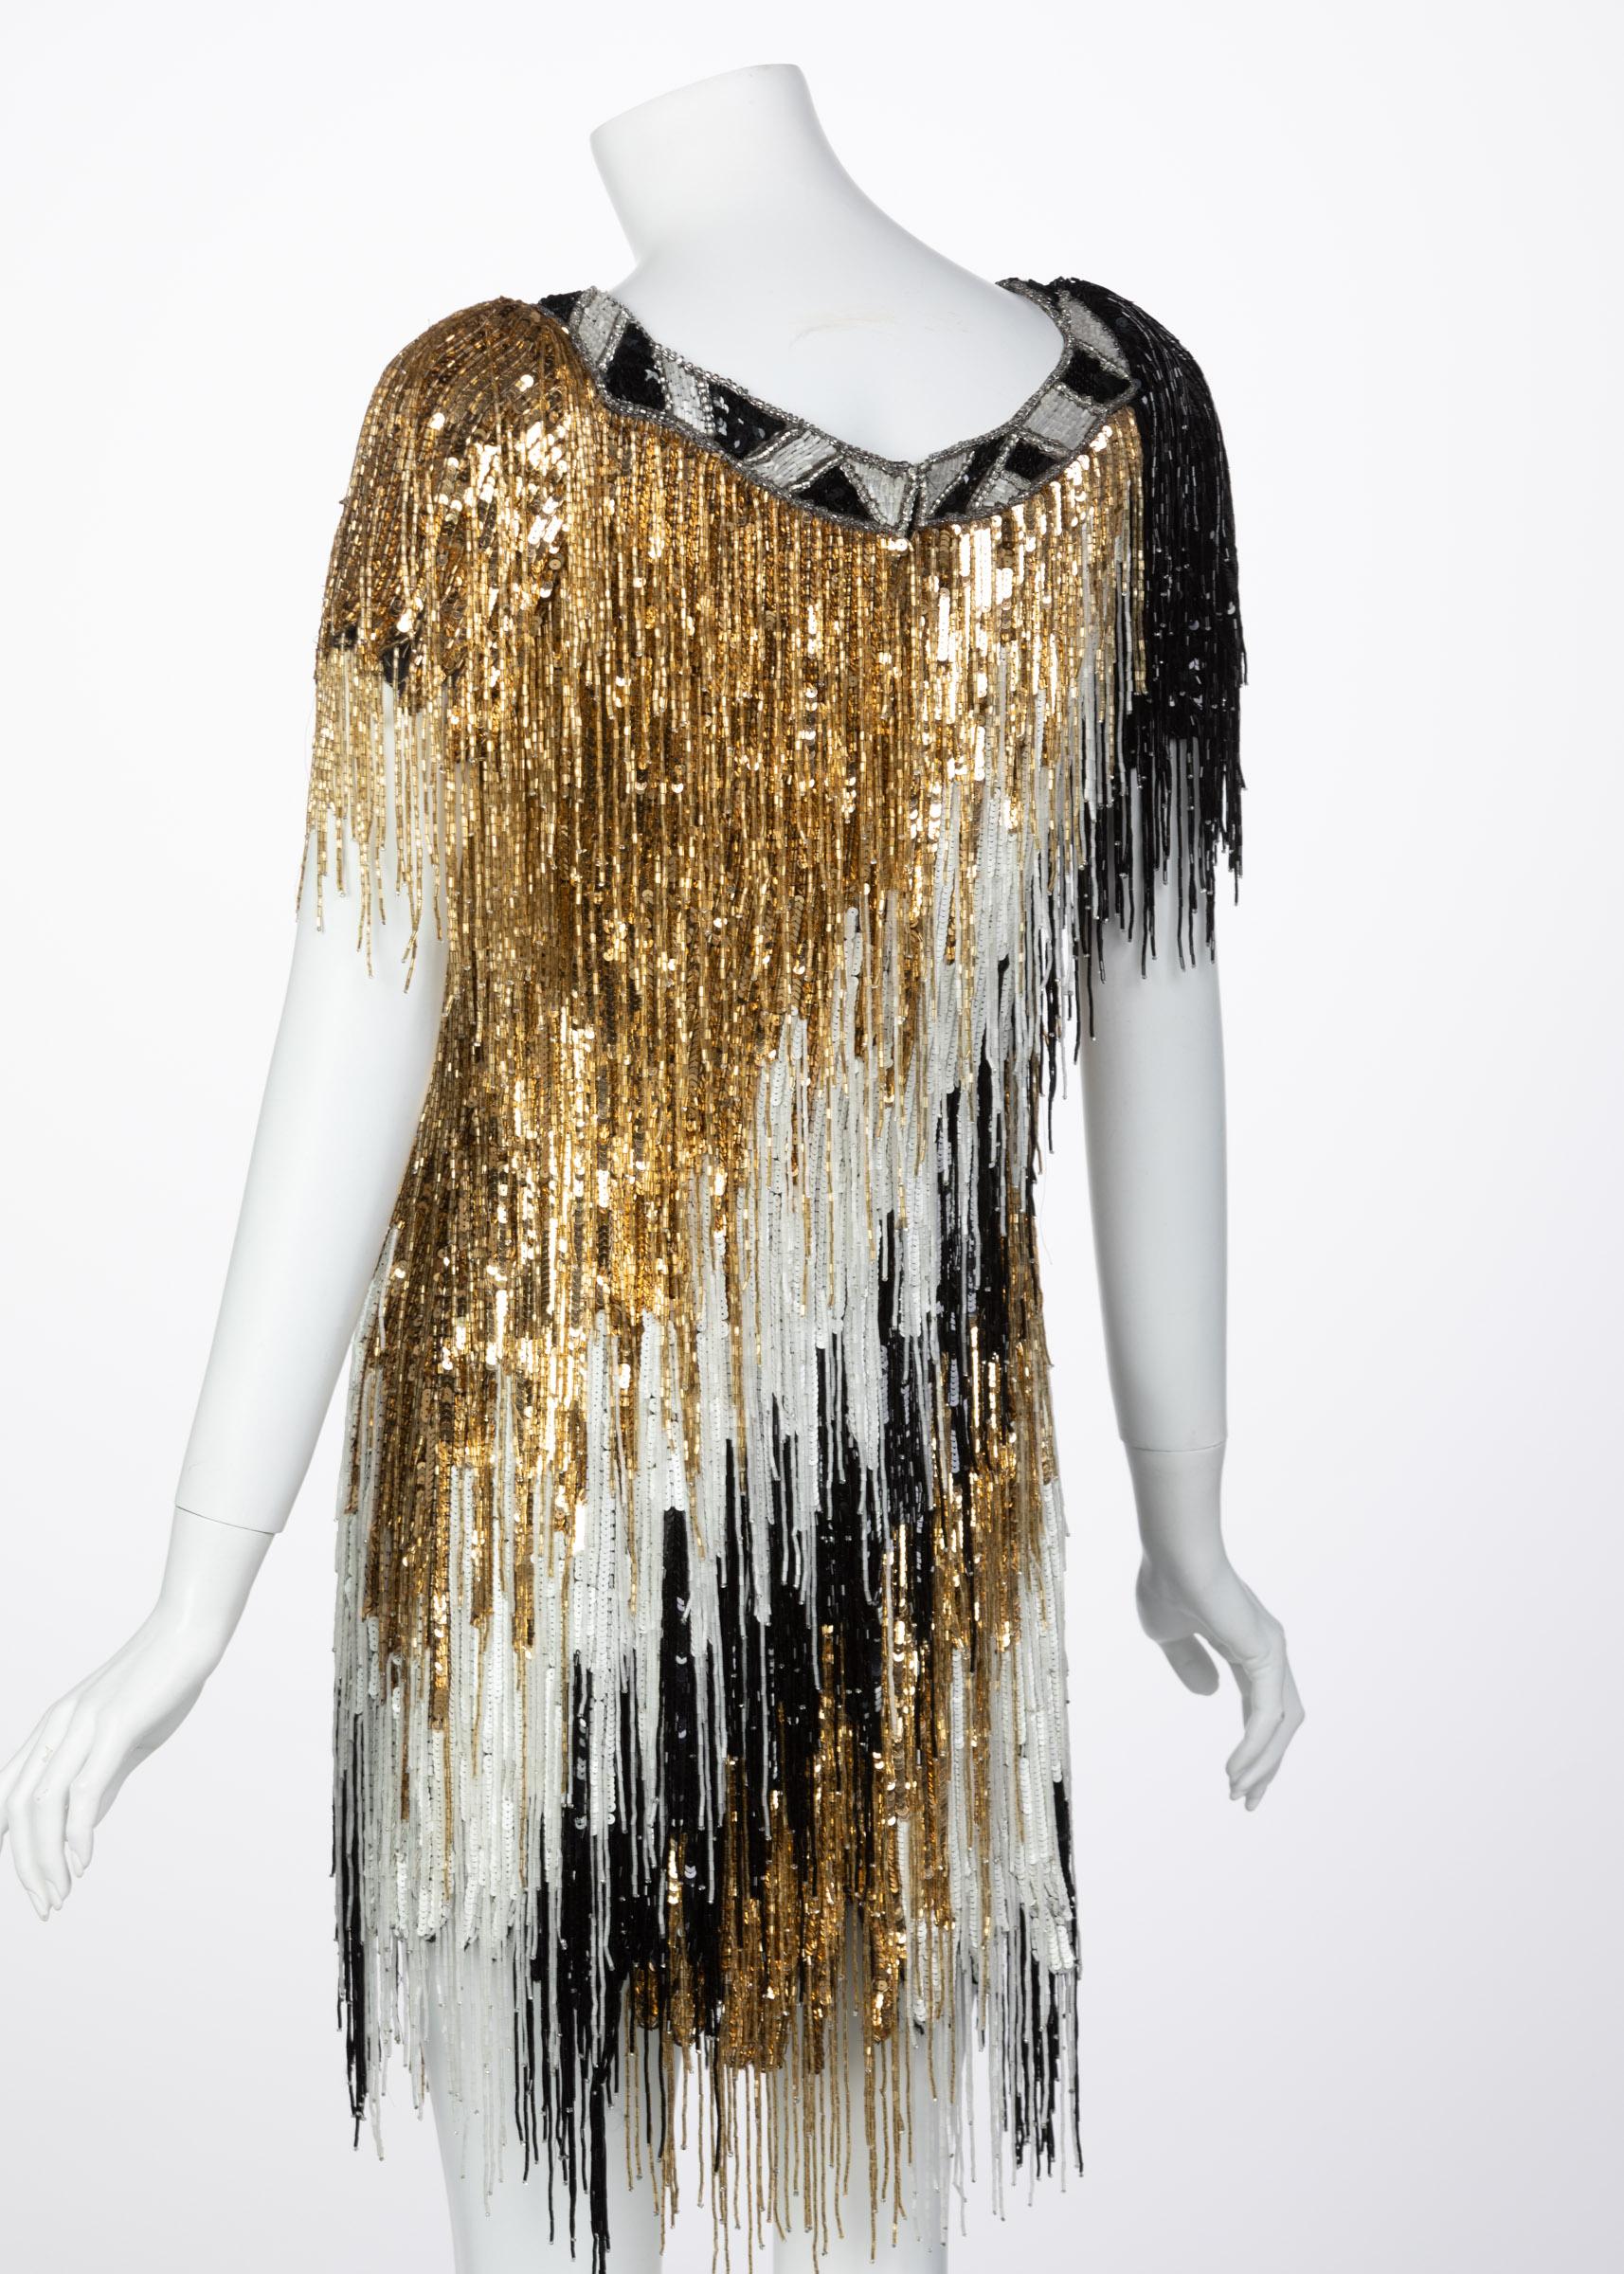 Incredible Vintage Bob Mackie Gold Black White Beaded Fringe Mini Dress In Excellent Condition For Sale In Boca Raton, FL